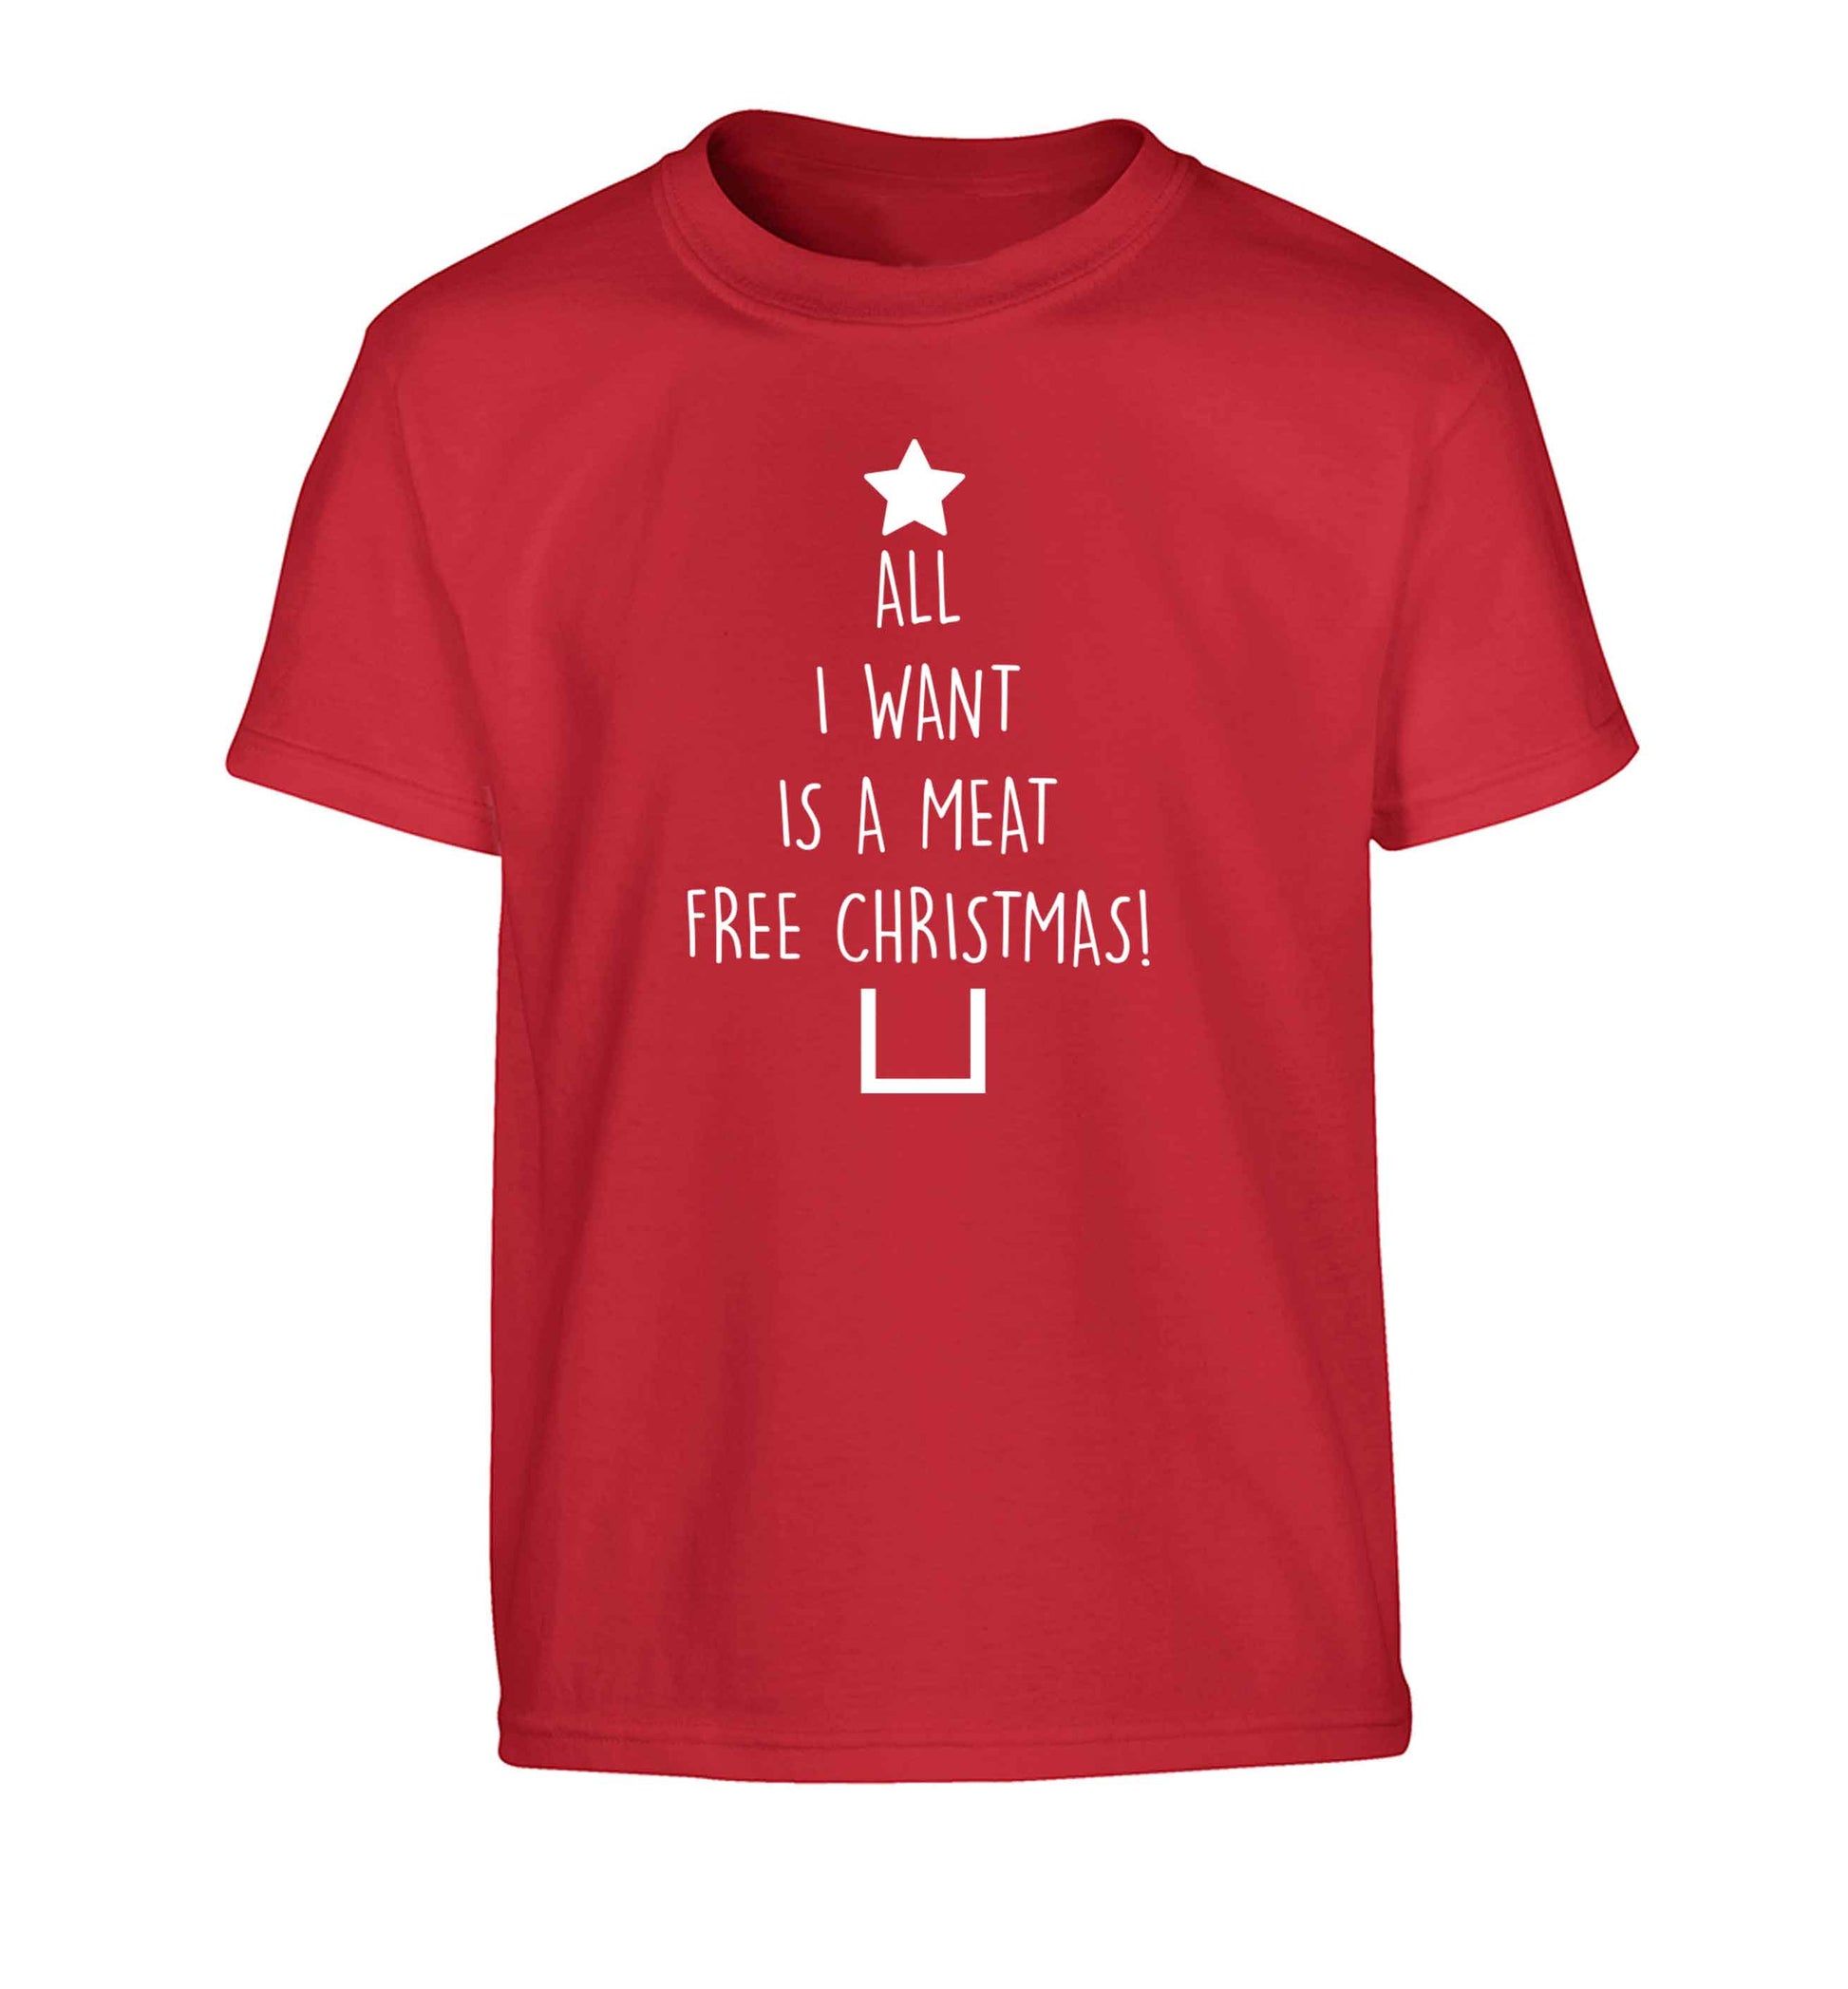 All I want is a meat free Christmas Children's red Tshirt 12-13 Years